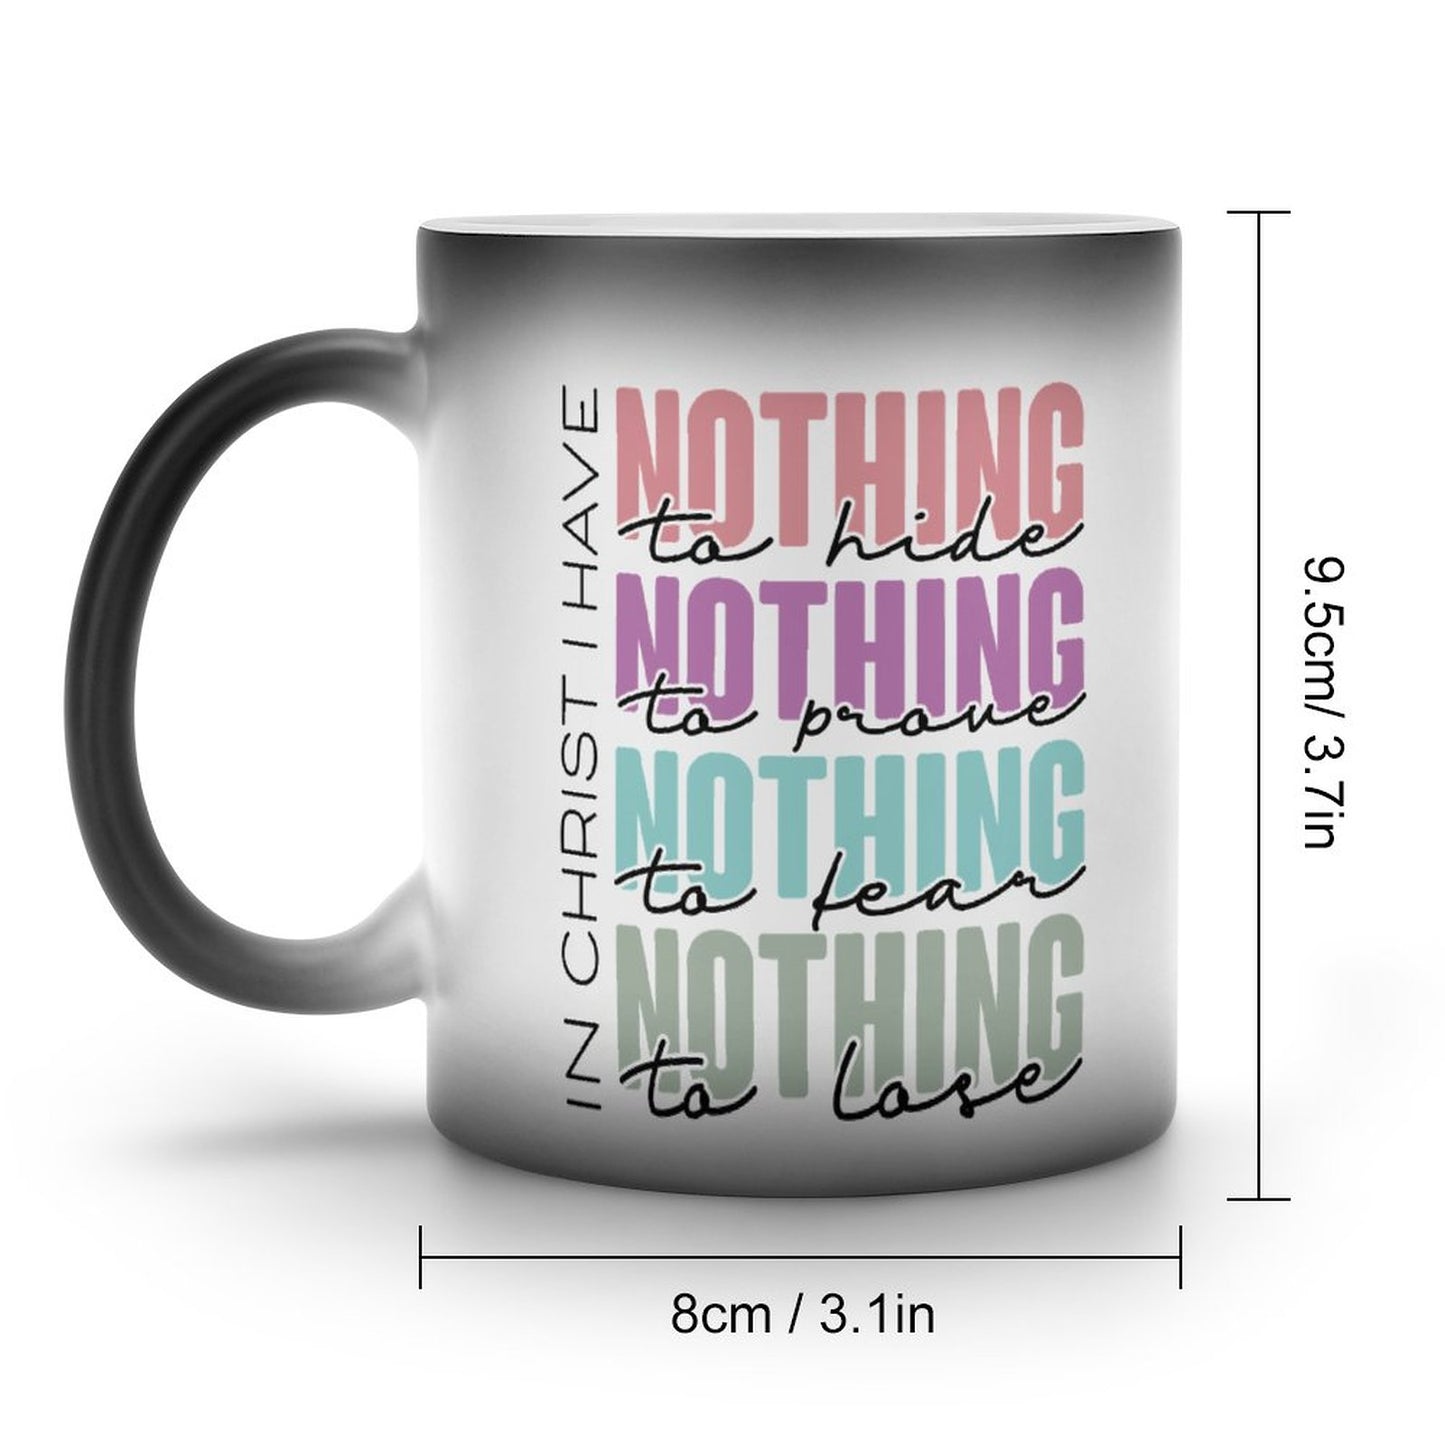 In Christ I Have Nothing To Hide, Prove, Fear, Lose Christian Color Changing Mug (Dual-sided)